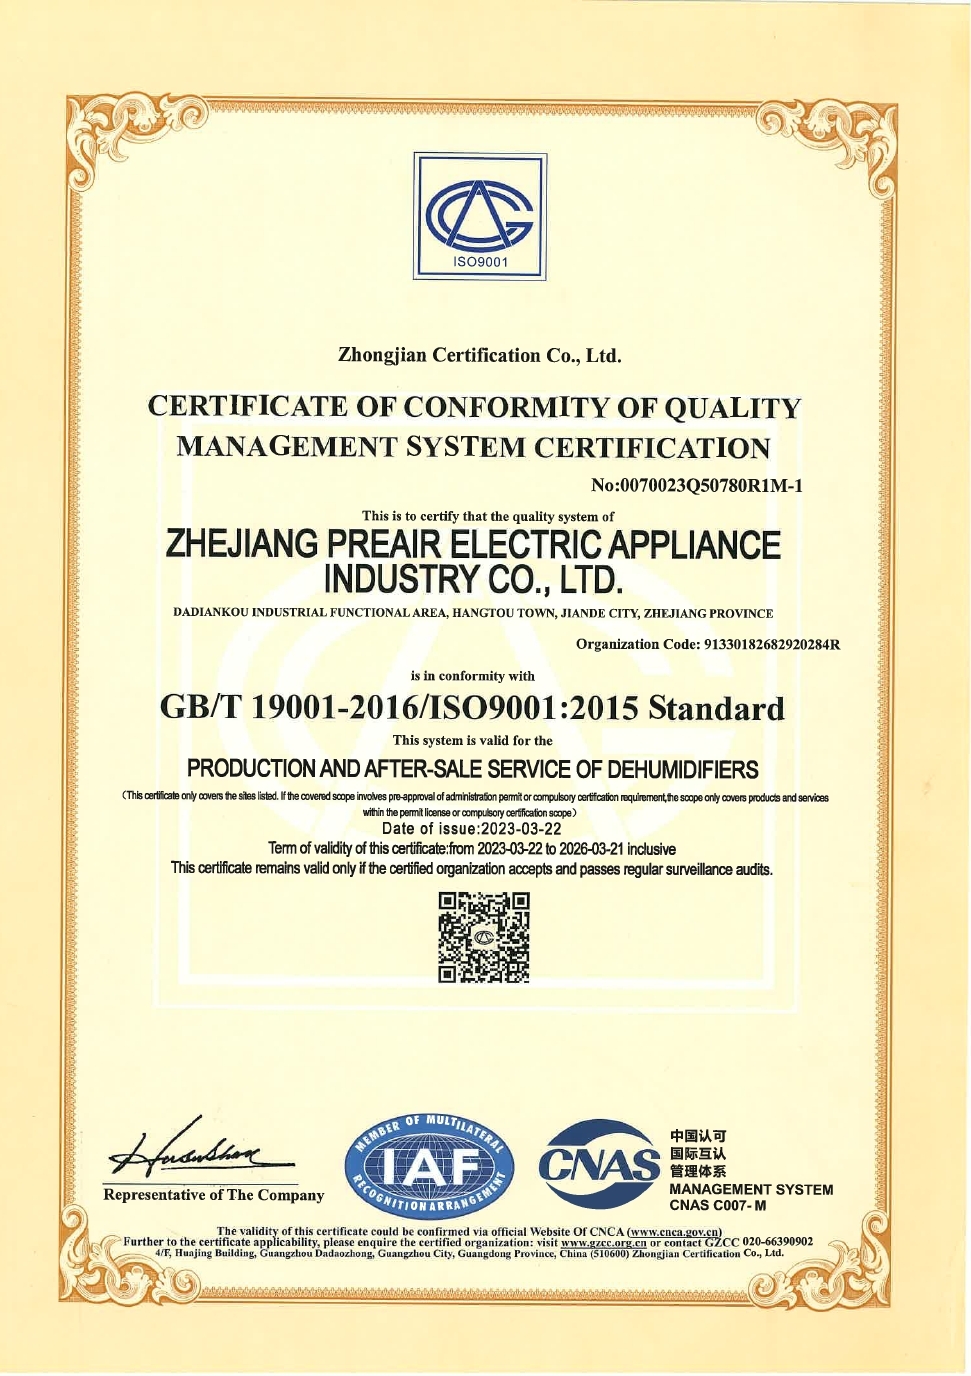 Preair Certificate of Conformity of Quality Management System Certification